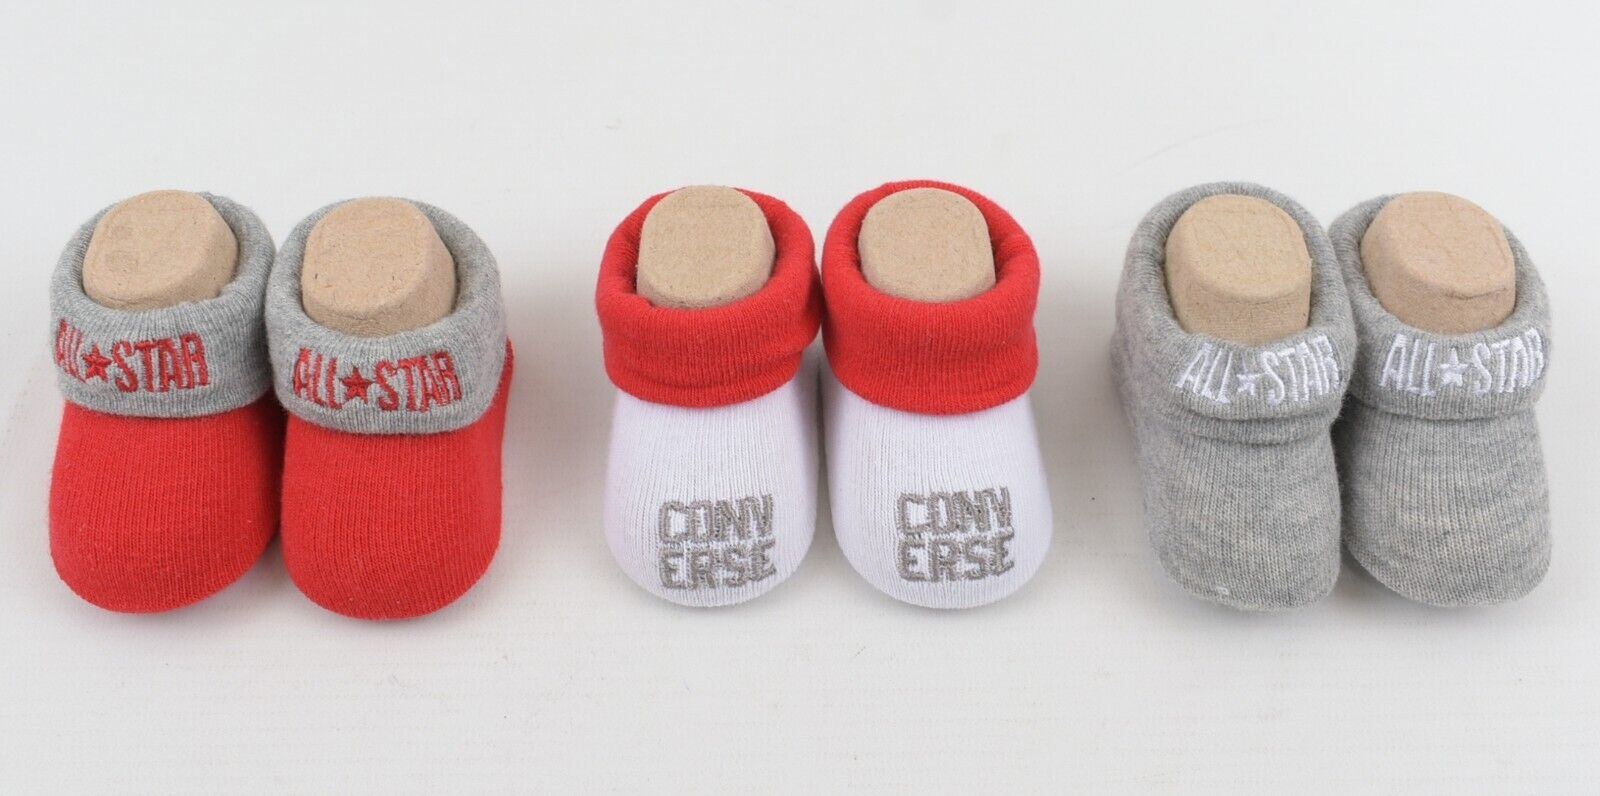 CONVERSE Baby Girls' Boys' 3-pack Sock Booties, White/Red/Grey, 0-6 months